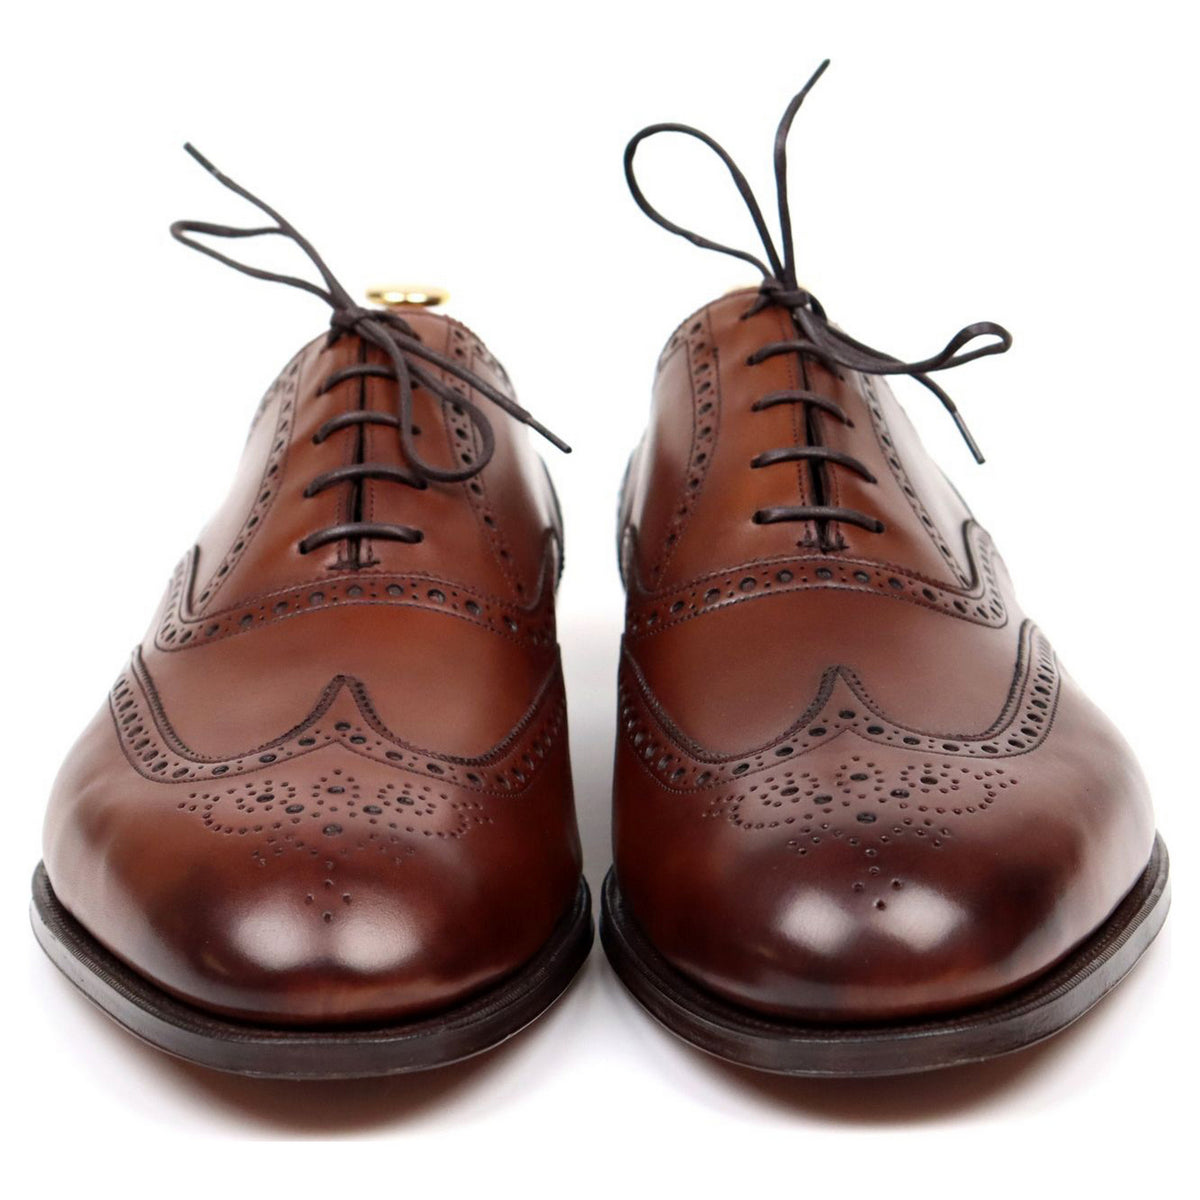 Malvern' Brown Leather Brogues UK 12 F - Abbot's Shoes